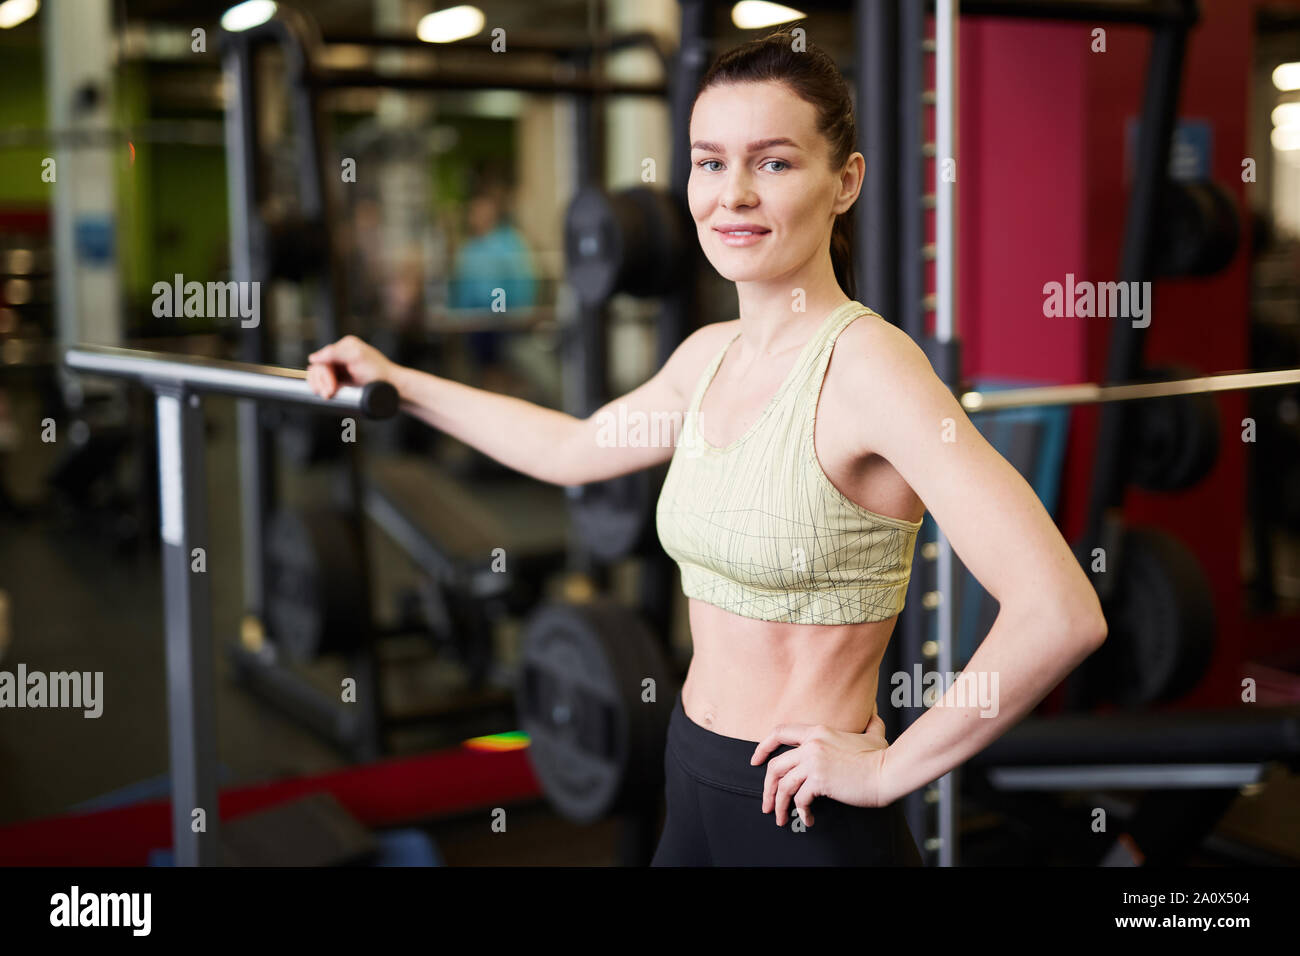 Waist up portrait of fit young woman smiling looking at camera while posing against machines in modern gym, copy space Stock Photo